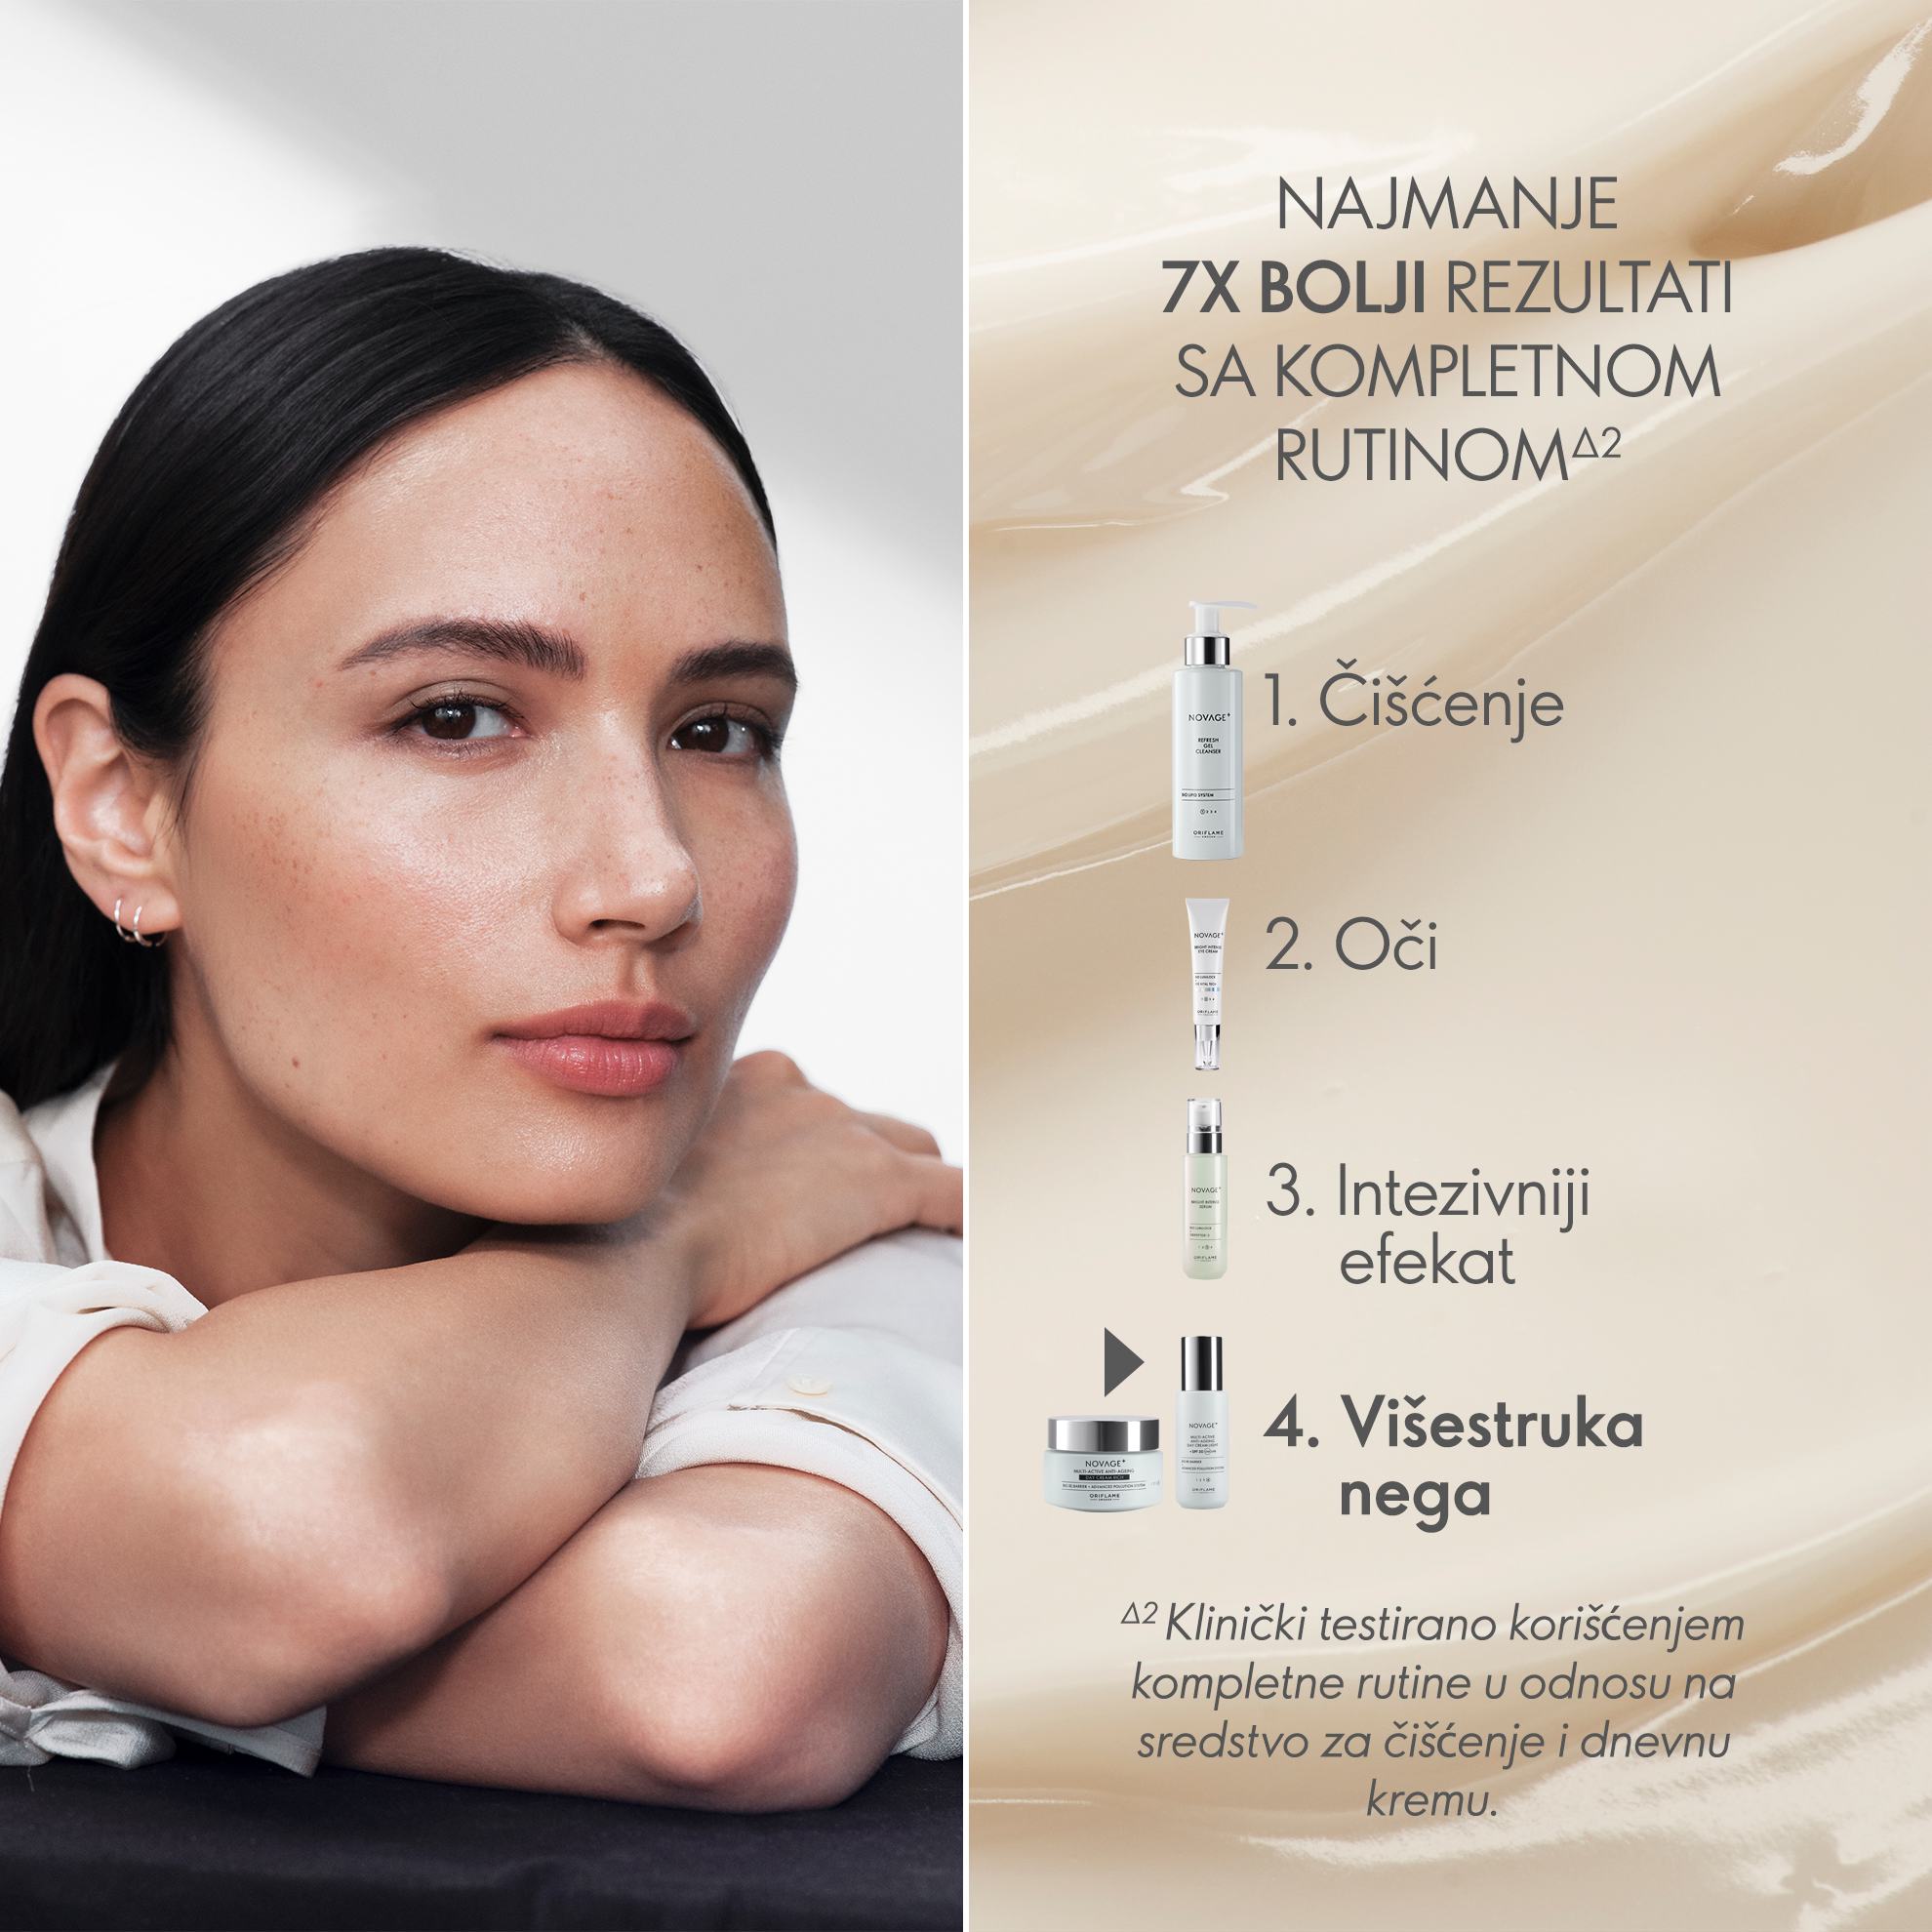 https://media-cdn.oriflame.com/productImage?externalMediaId=product-management-media%2fProducts%2f41047%2fME%2f41047_5.png&id=17551312&version=2